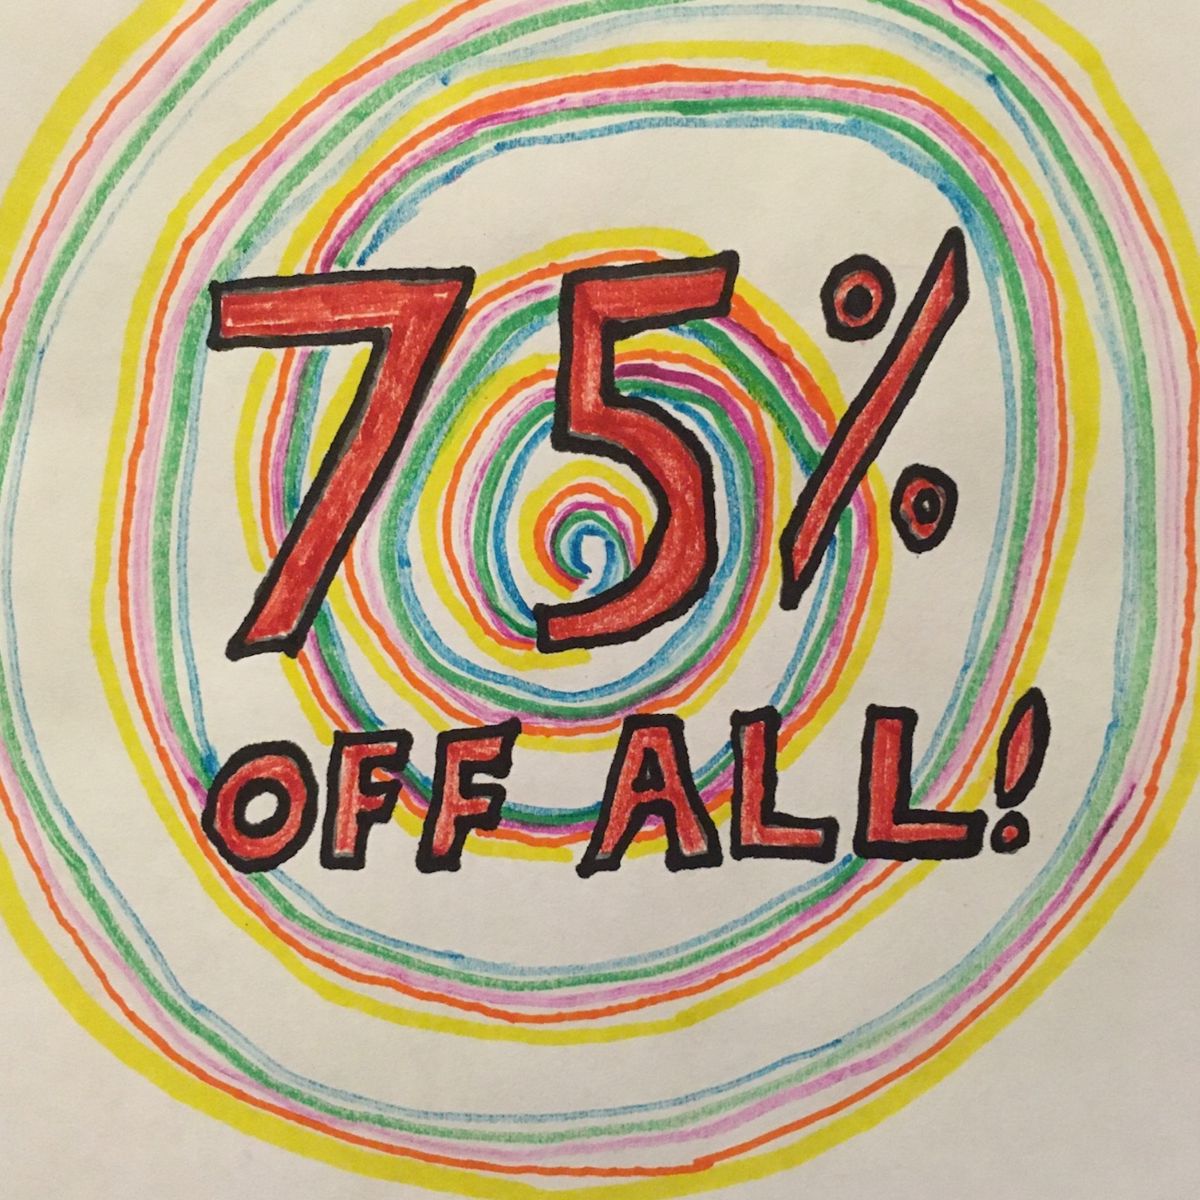 75% off of EVERYTHING! Sunday… One hour only! 4:00-5:00. See you there; bring cash and be ready to haul your goodies away!